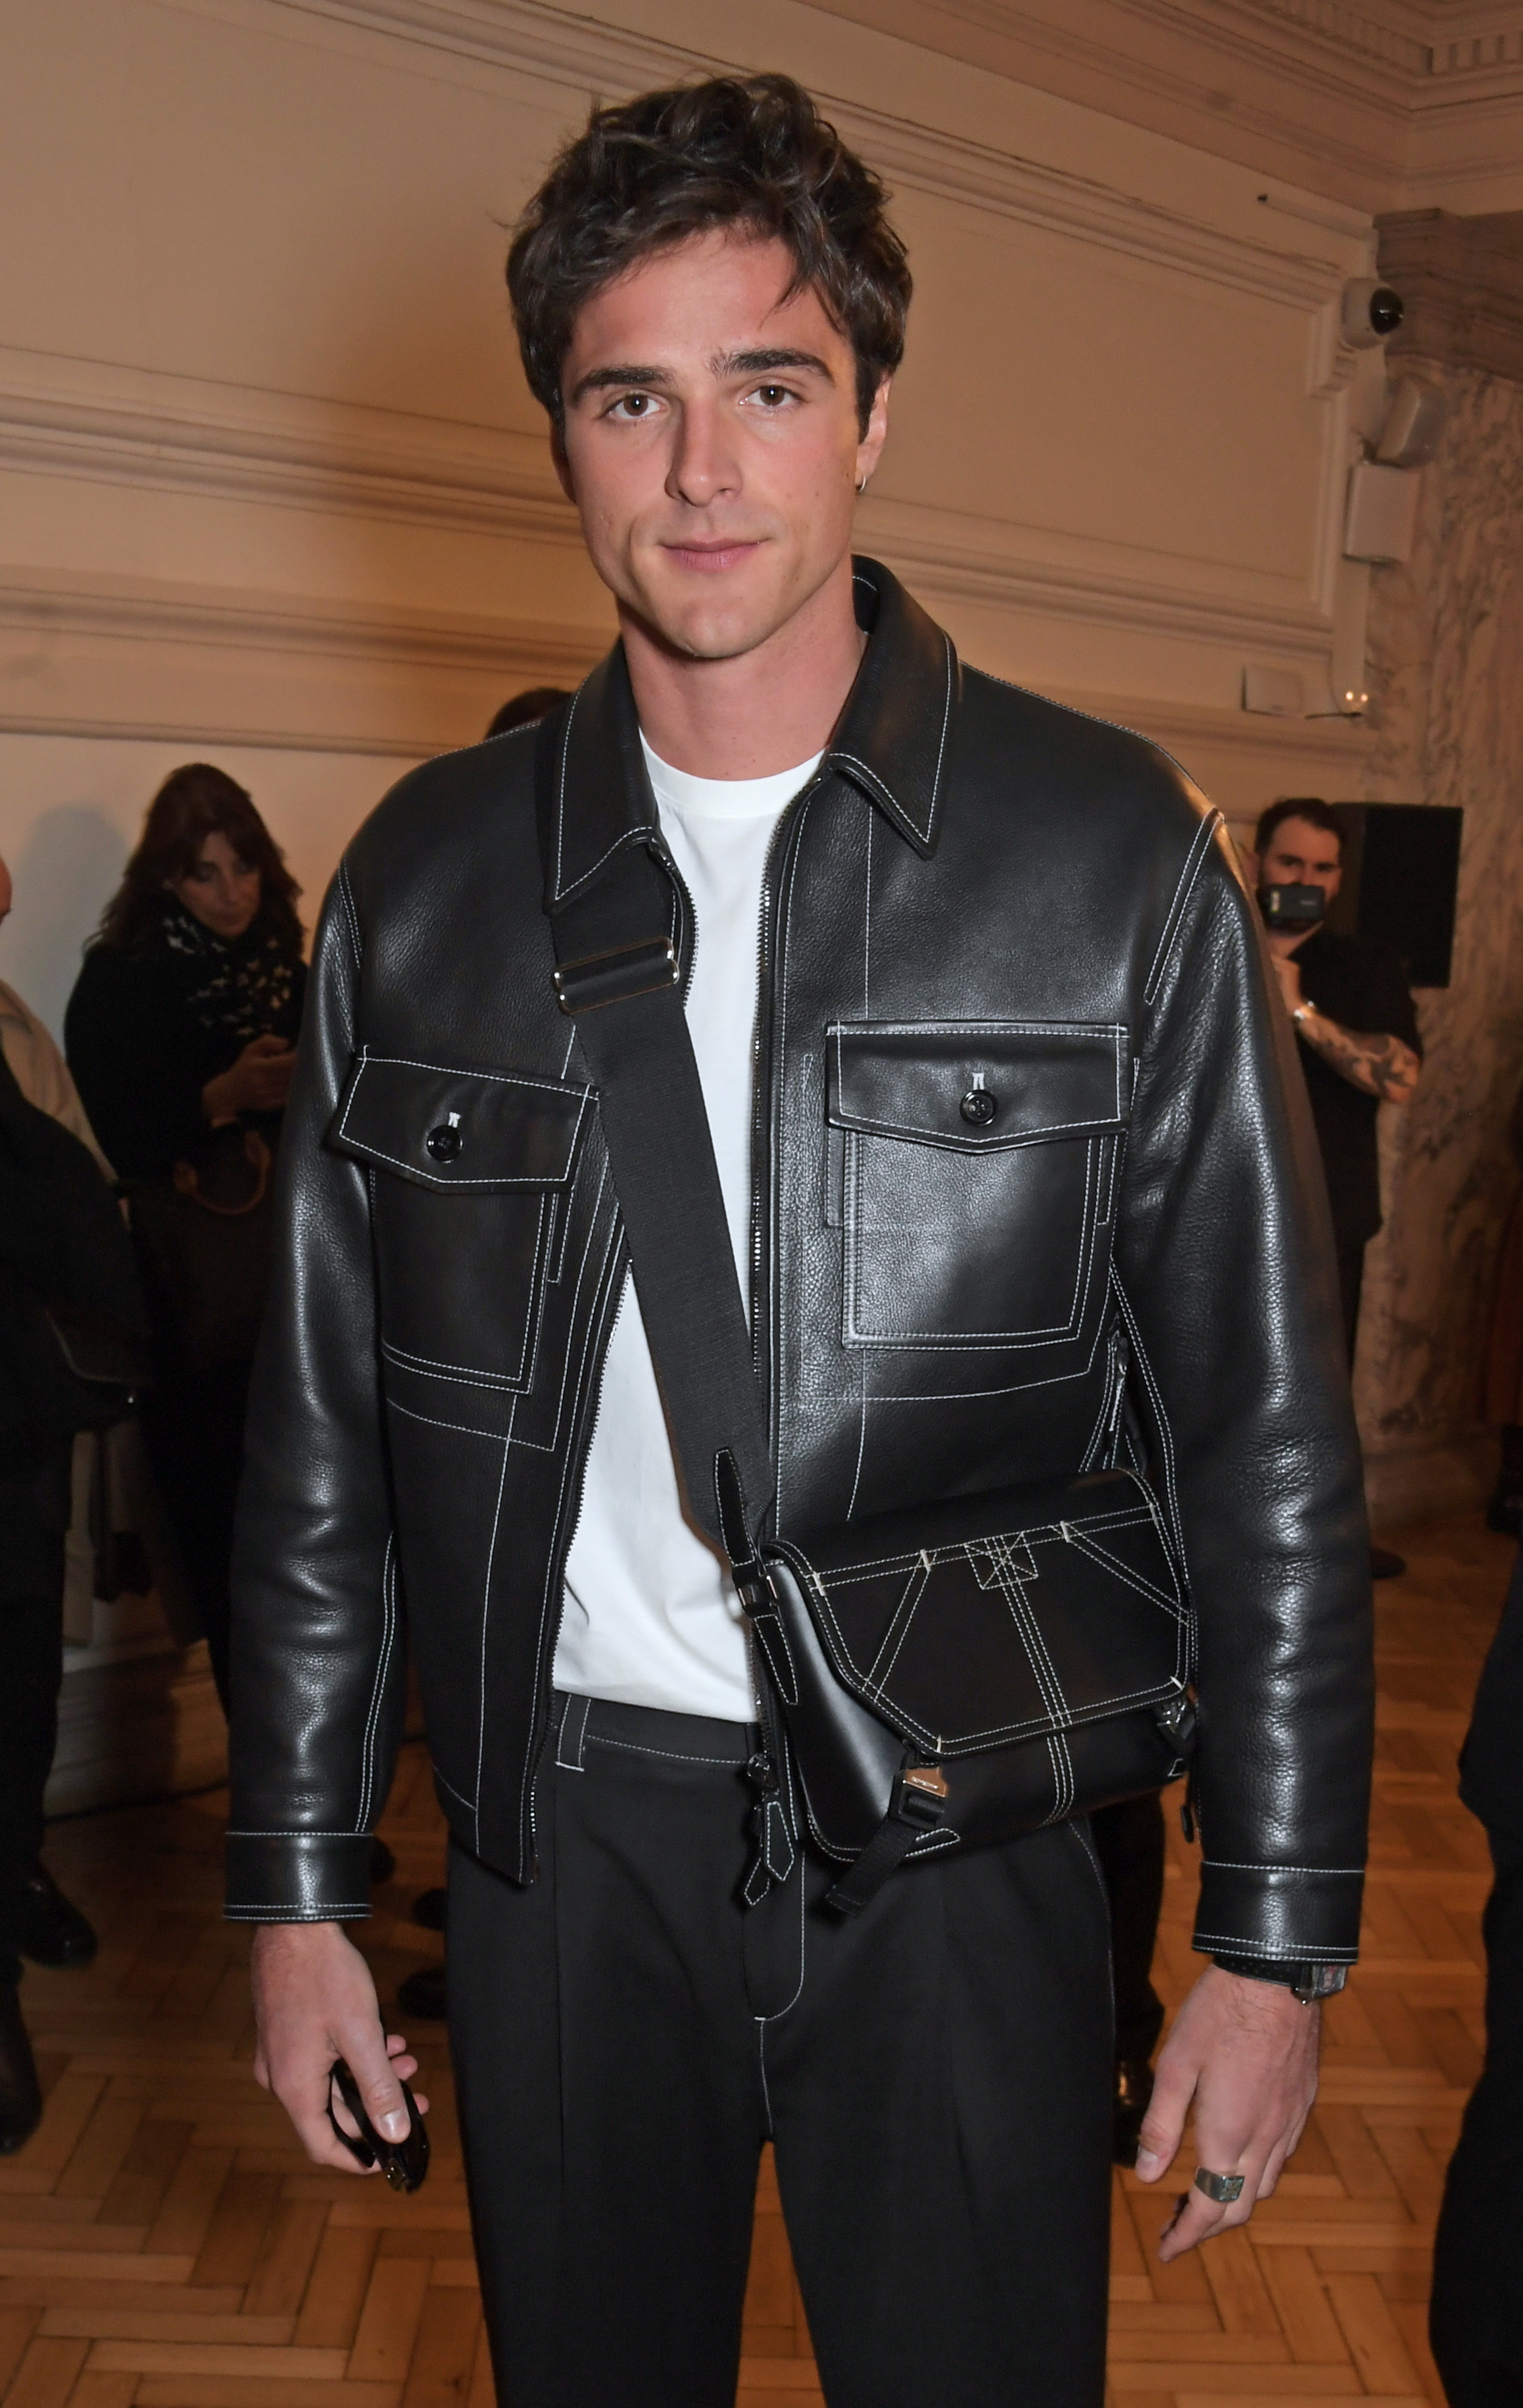 Close-up of Jacob in a leather jacket with a small shoulder bag that reaches his waist